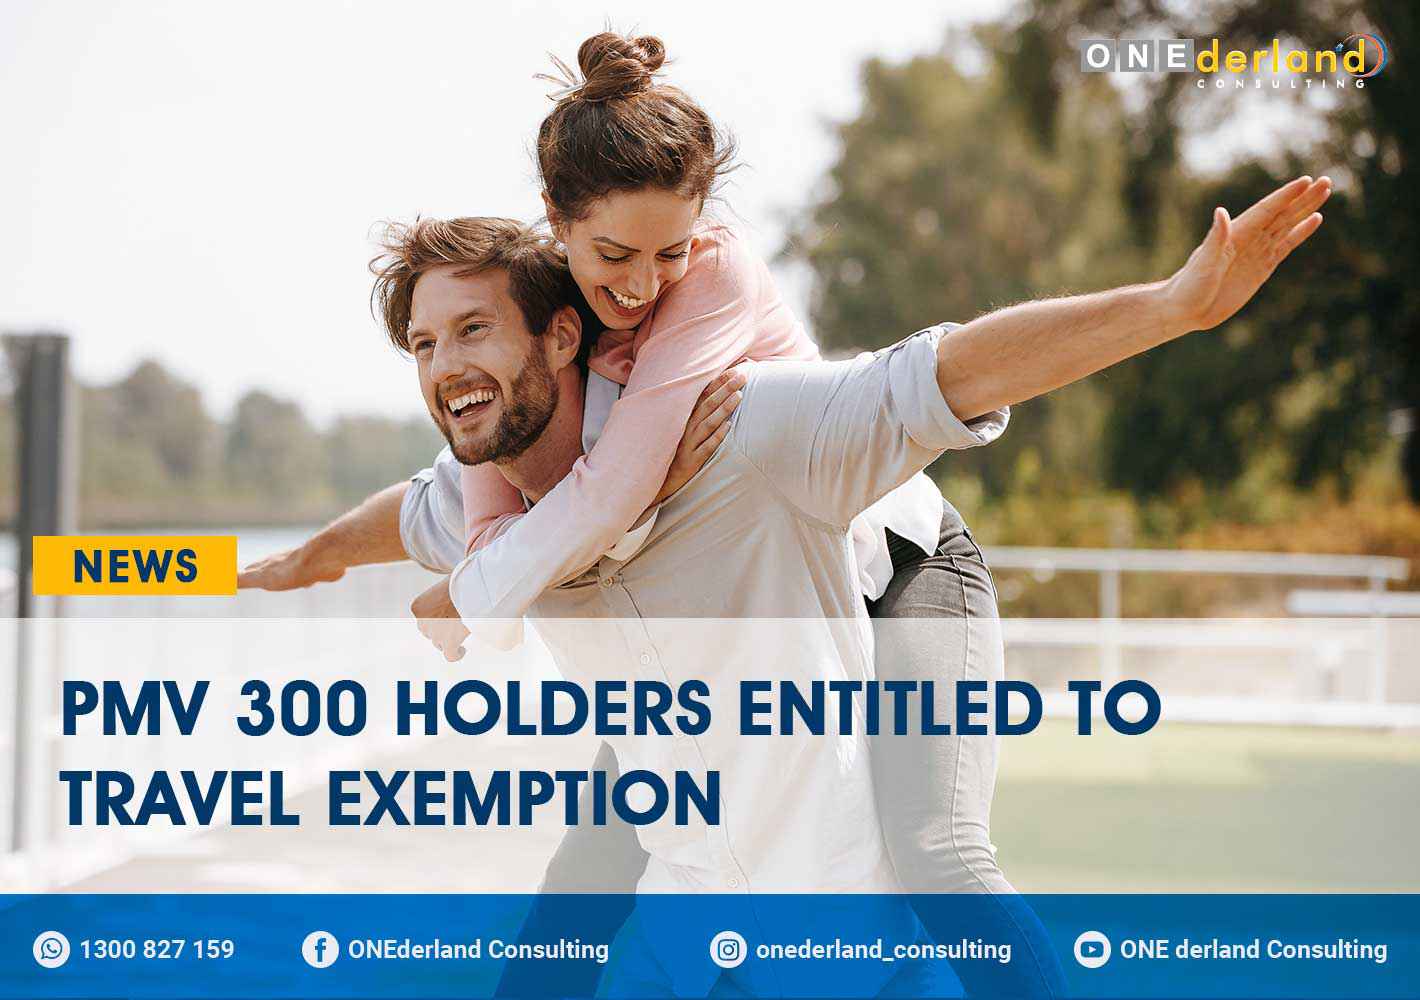 Prospective Marriage (subclass 300) holders will be eligible for Travel Exemptions